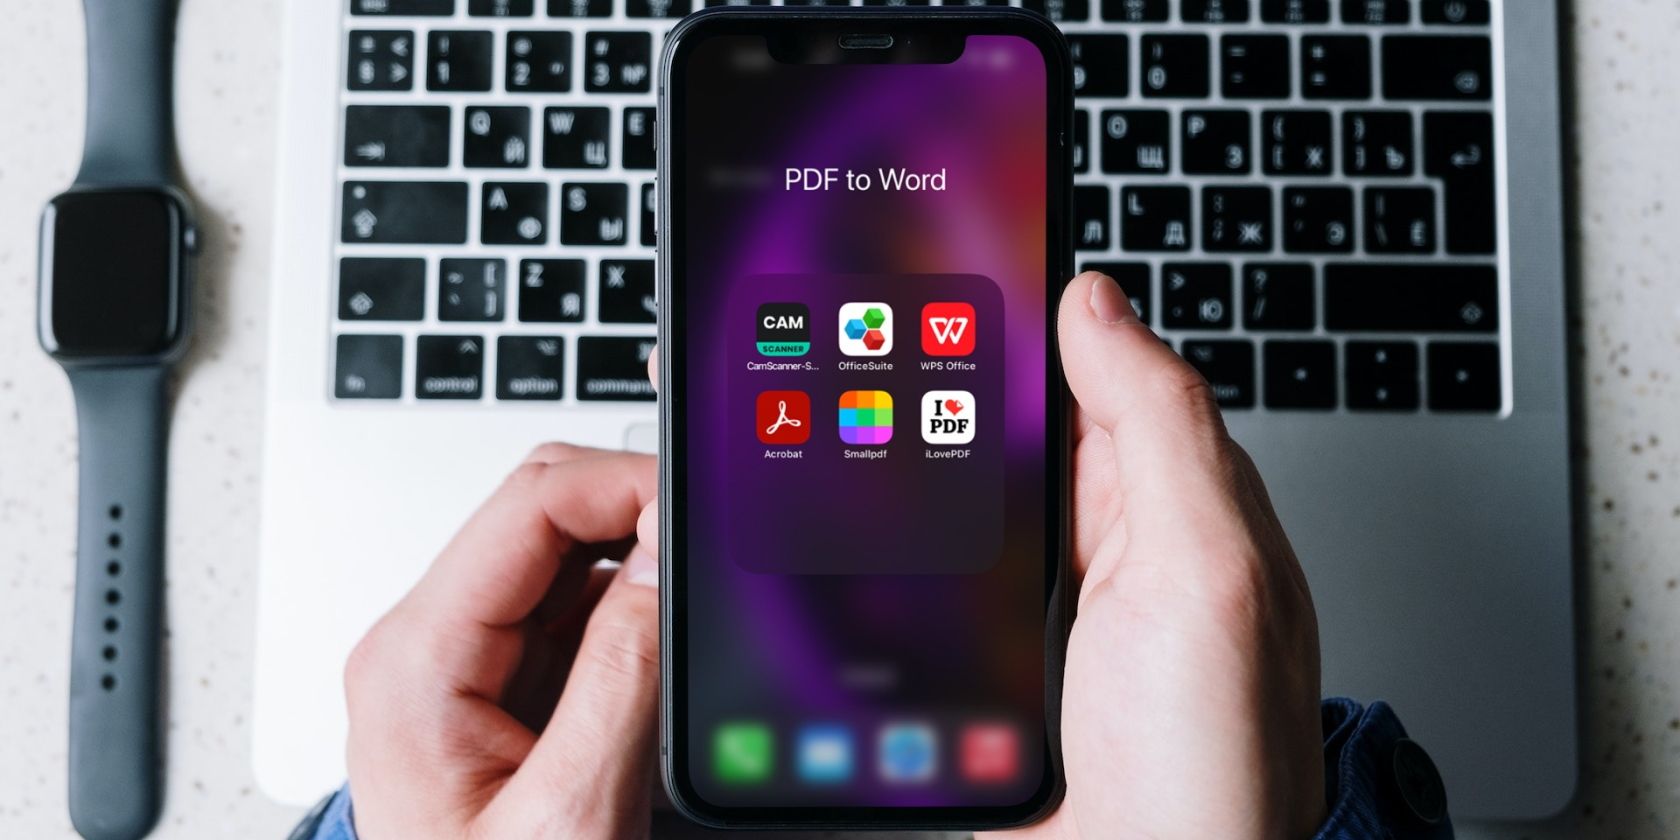 PDF to Word apps on an iPhone